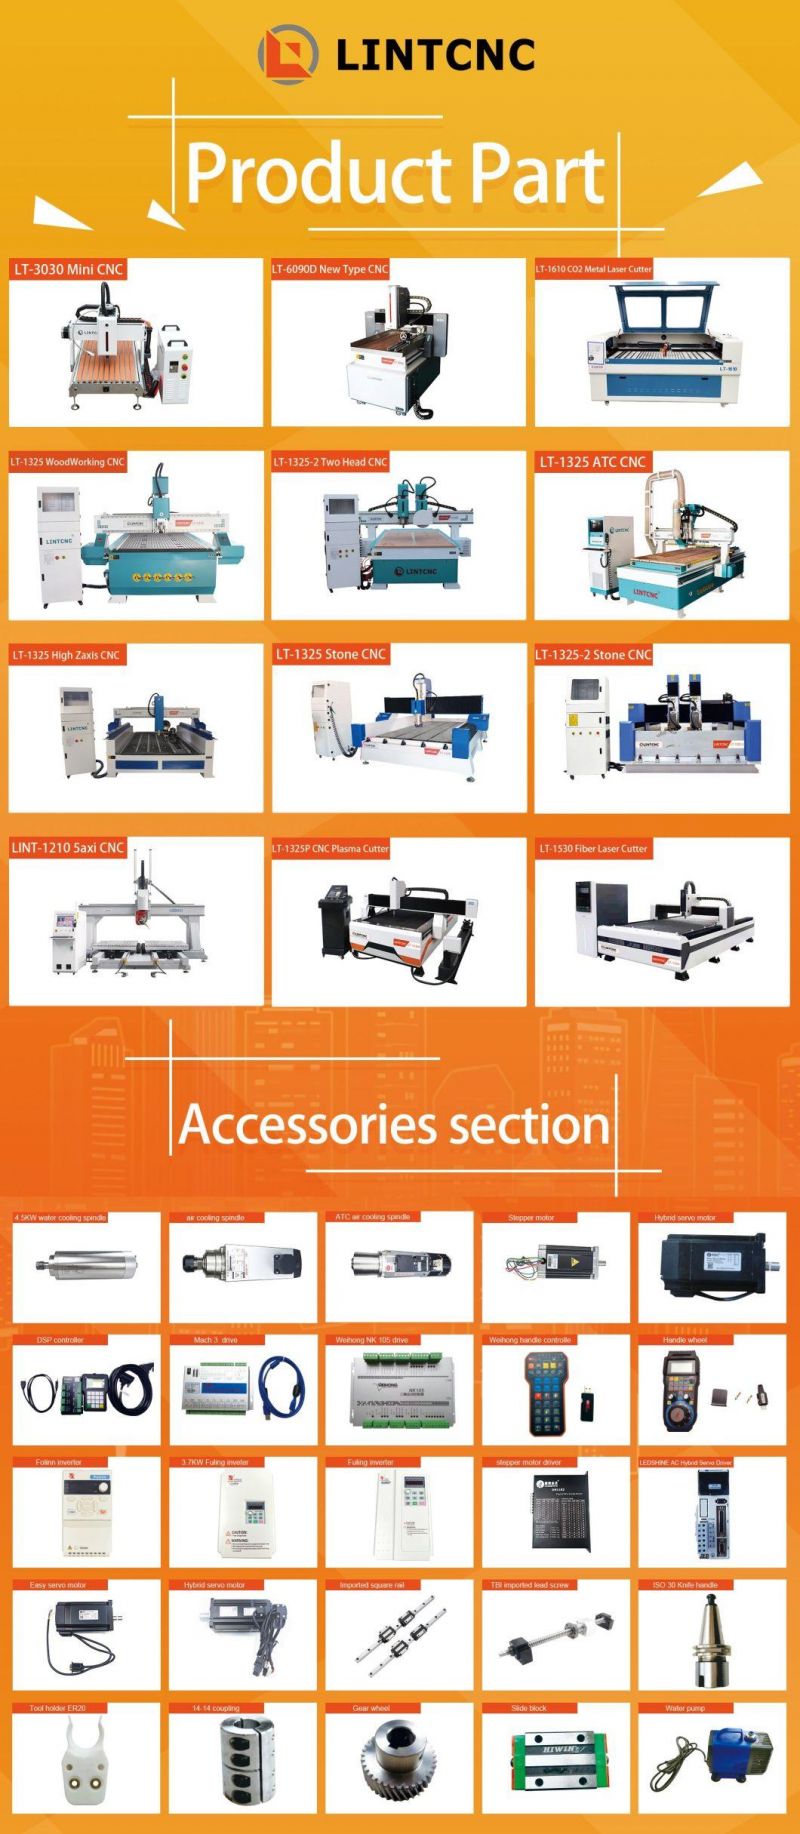 900X1500mm Mini Atc Machinery 3D CNC Router with Linear Tool Magazine 1.5kw 2.2kw 3.2kw 9015 9012 Automatic Cutter Changing CNC Machine for Wood Aluminum